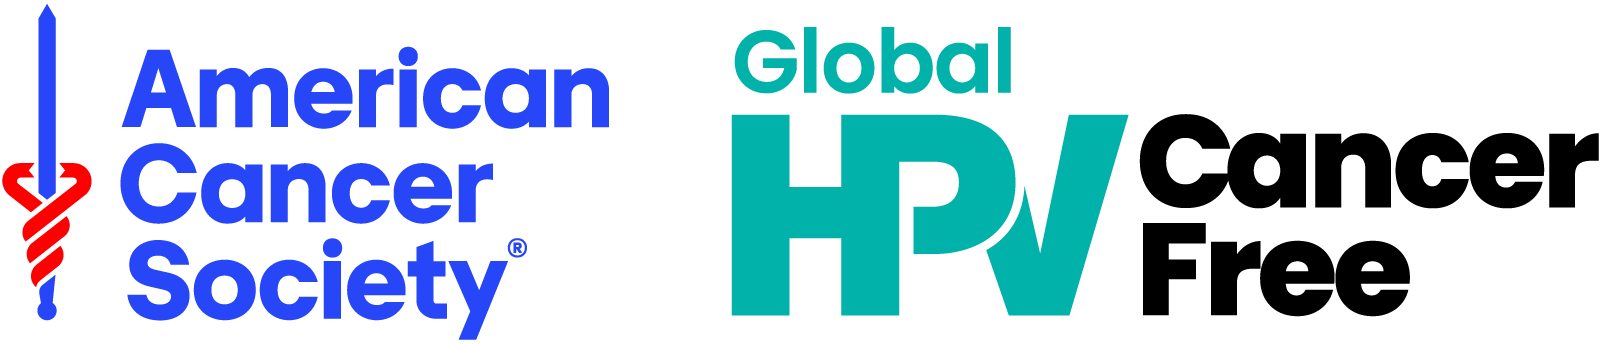 American Cancer Society and Global HPV Cancer Free logo